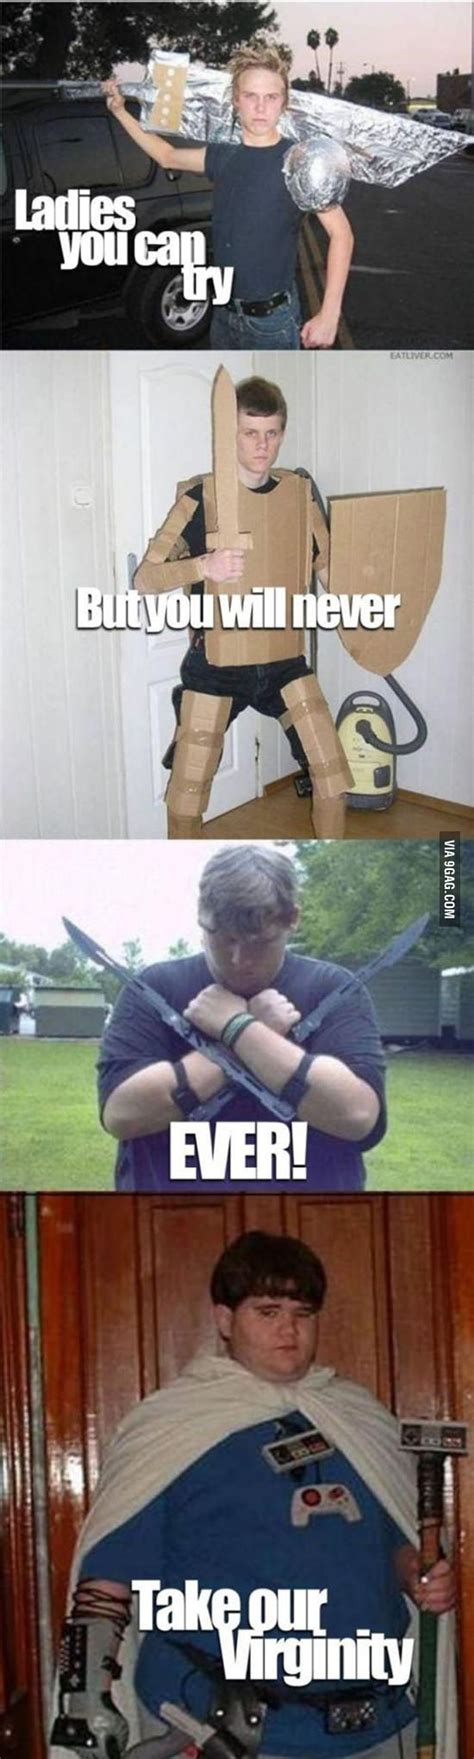 Best Way To Protect Your Virginity 9gag